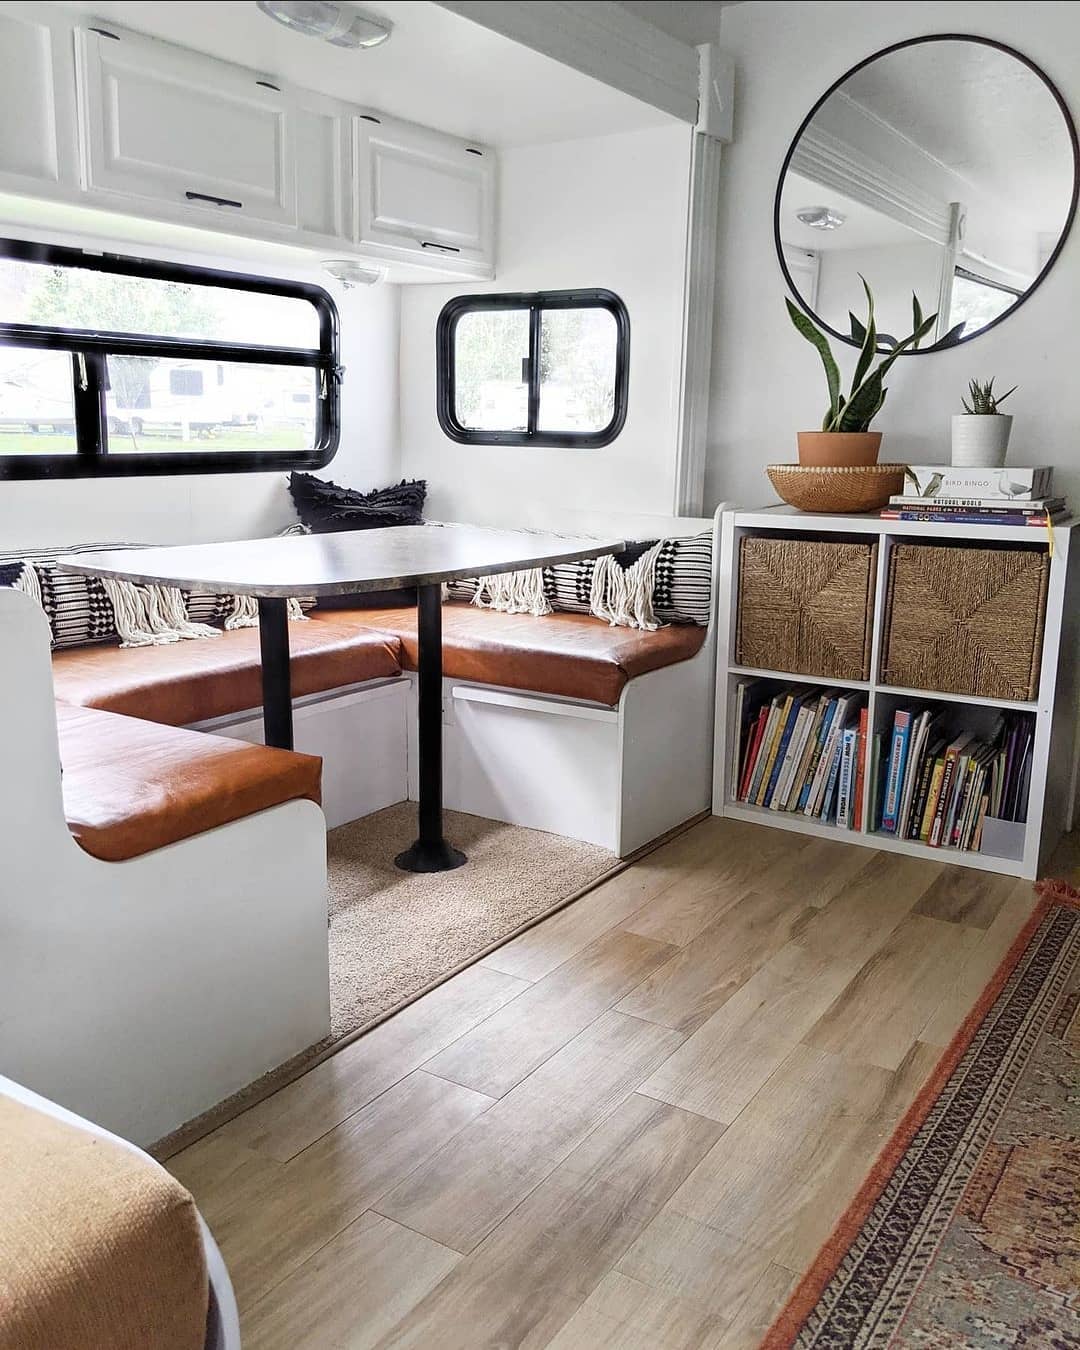 Organize and Maximize Your RV Space